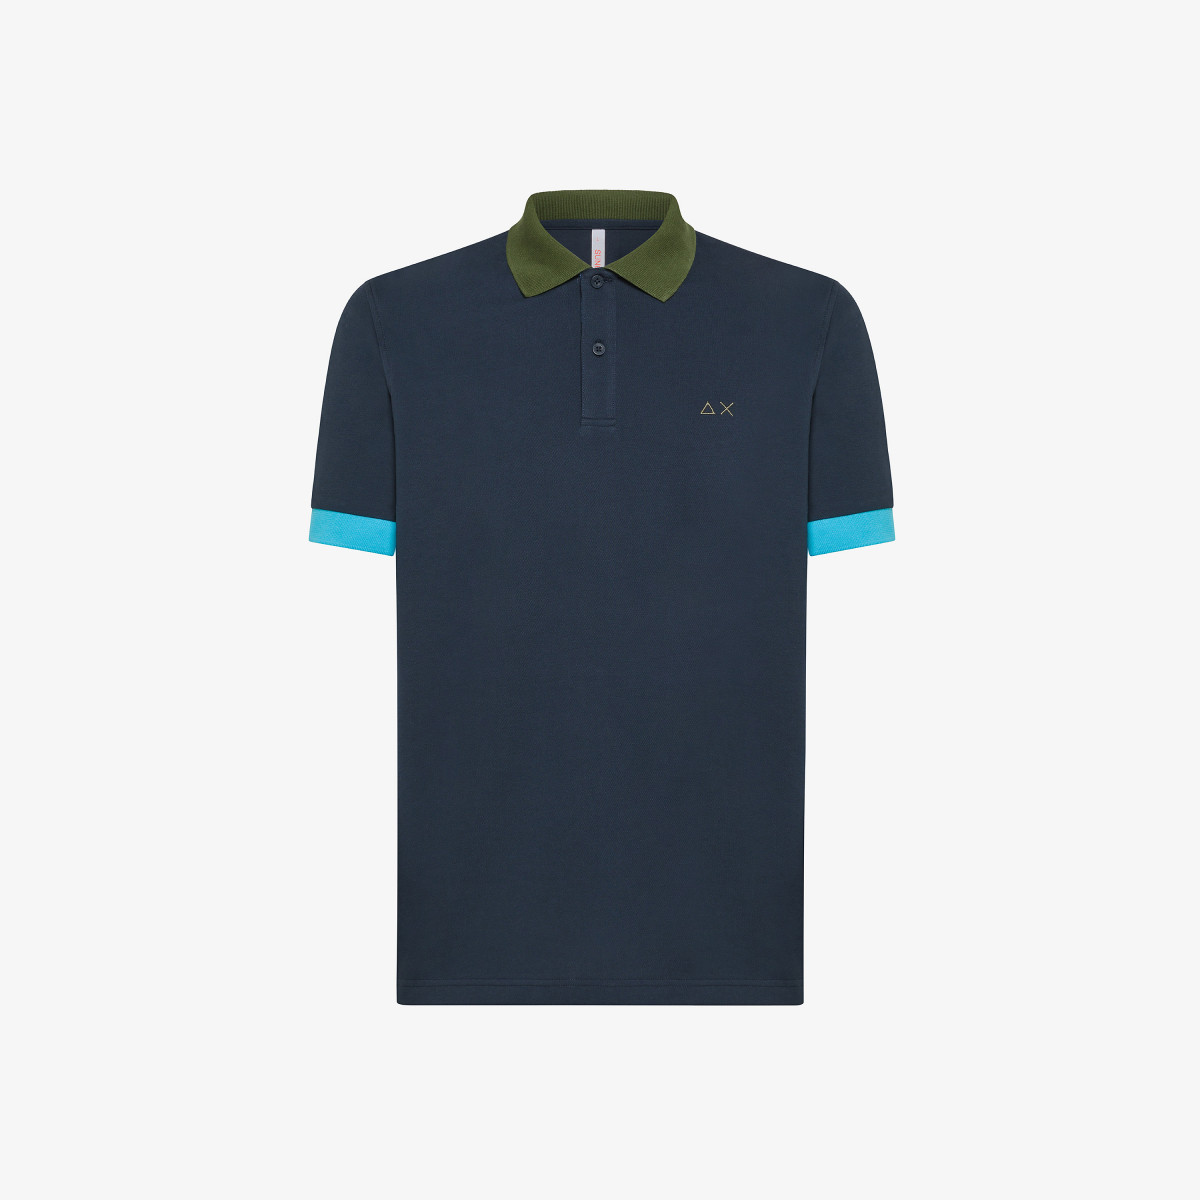 POLO 3 COLOR WAY S/S NAVY BLUE